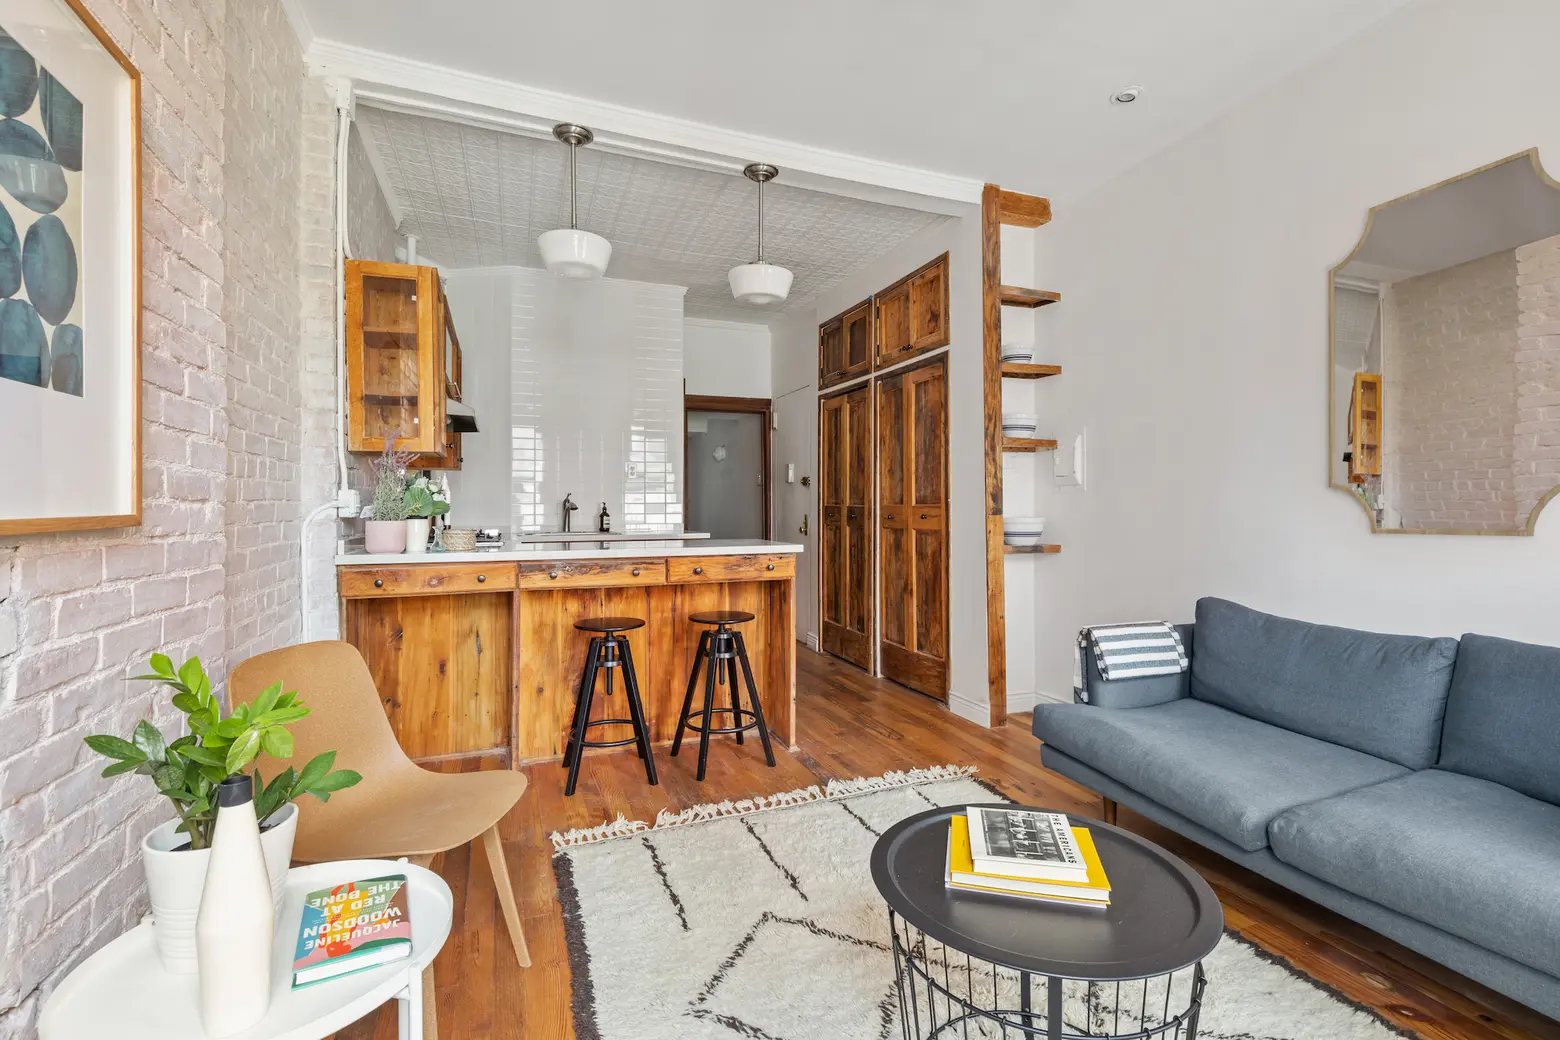 Netflix director asks $800K for his crafty Soho pad